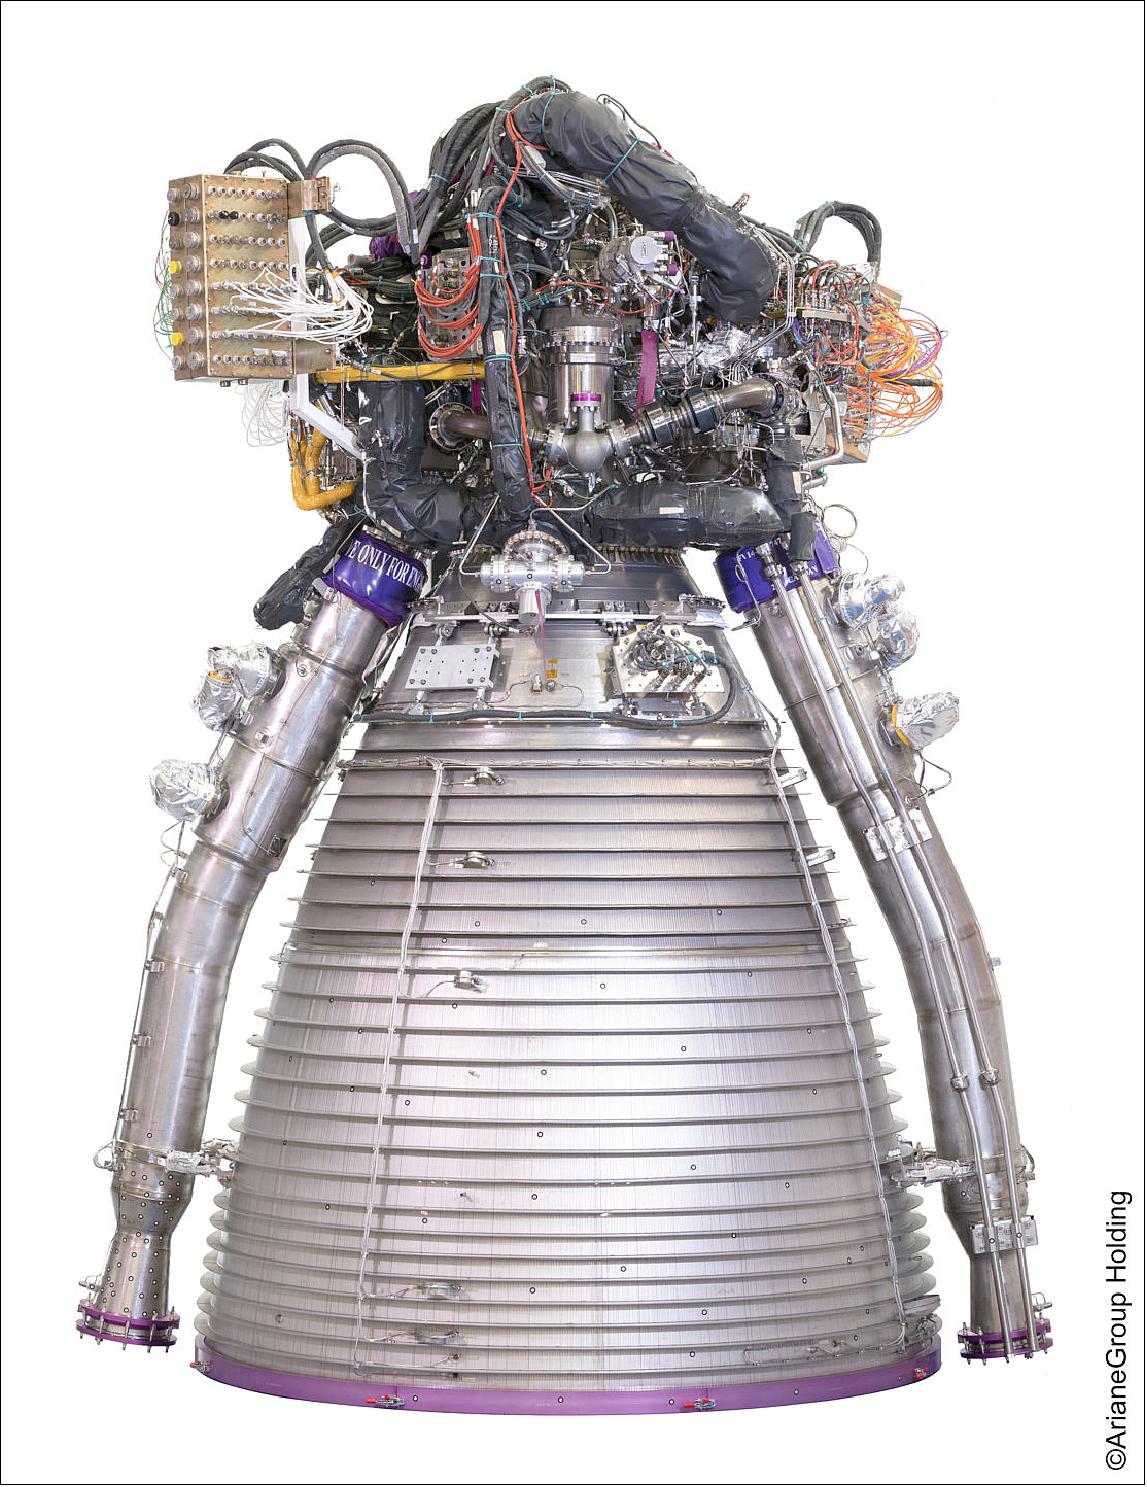 Figure 78: On 10 October 2017, the M1 demonstration flight model of the Vulcain 2.1 main stage cryogenic rocket motor for Ariane 6 arrived in the DLR German Aerospace Center test facility in Lampoldshausen for functional tests. The Vulcain is 3.7 m high, 2.5 m in diameter with a mass of about 2 tons, and will deliver 135 tons of thrust in vacuum (image credit: ArianeGroup Holding)